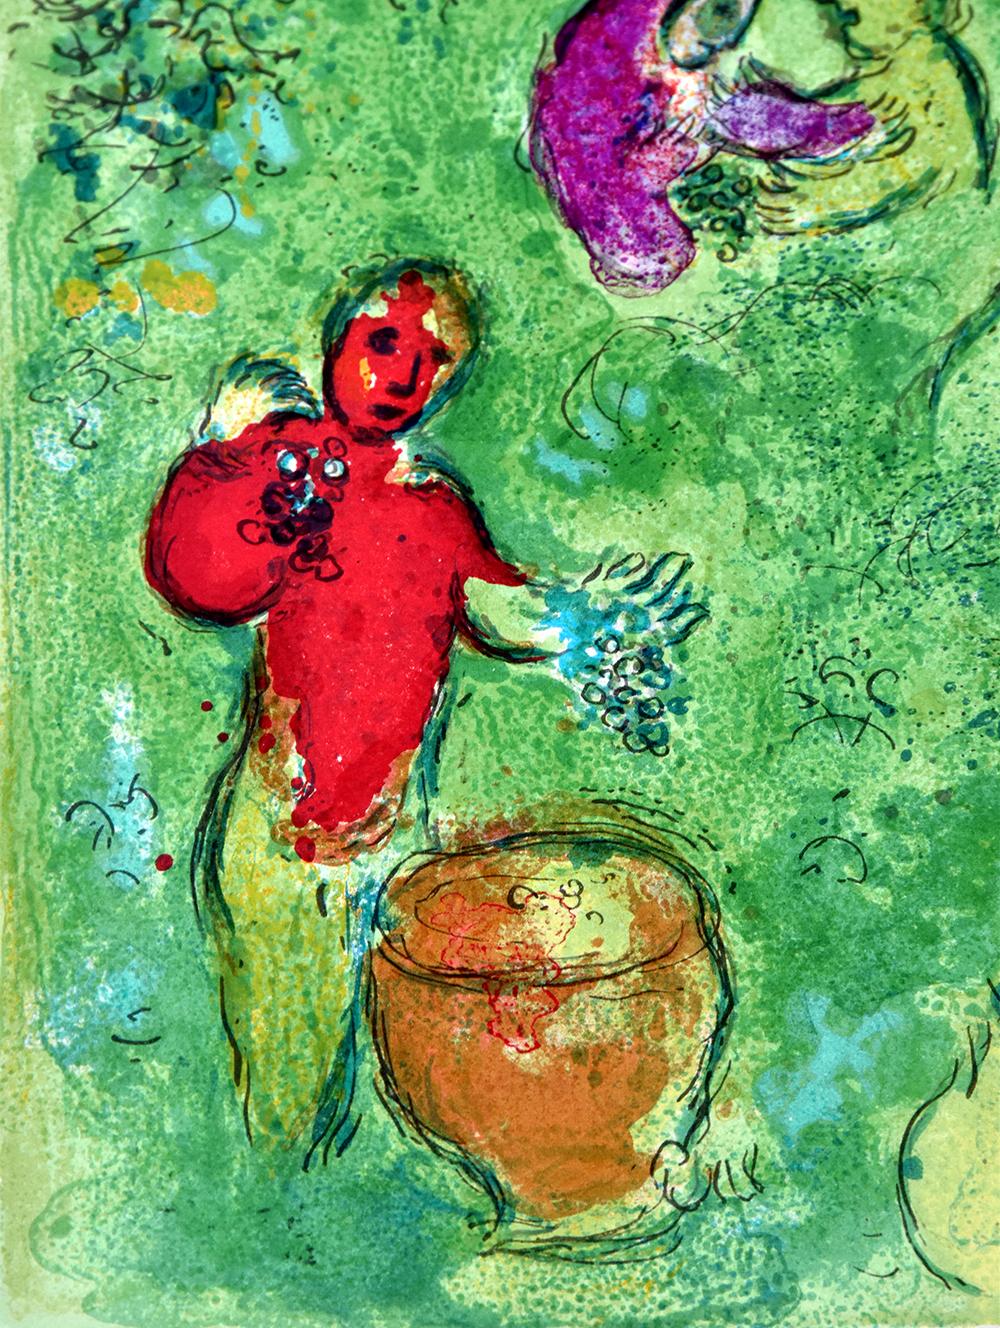 Marc Chagall’s Les Vendanges (The Wine Harvest), from Daphnis et Chloé, 1961 is one of the stunning lithographs within the illustrated Daphne and Chloe series that Fernand Mourlot considered to be one of 